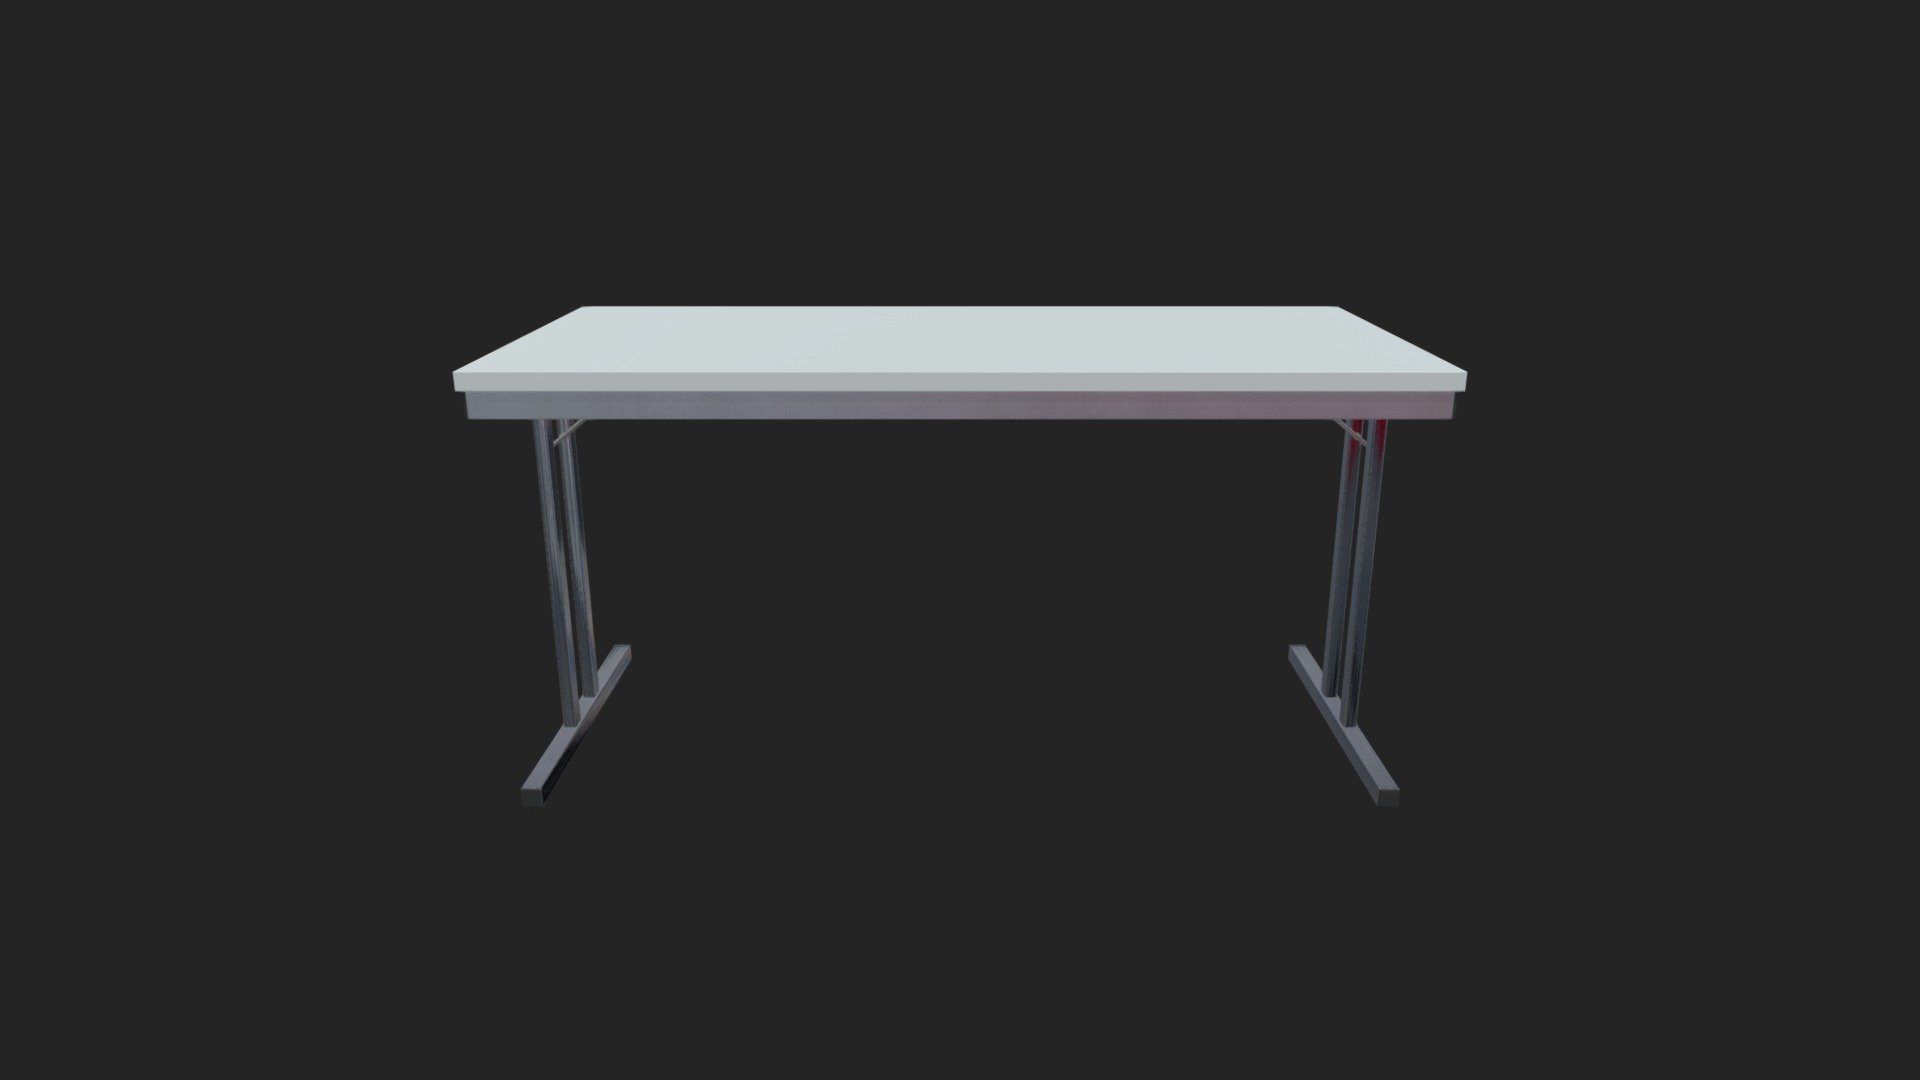 High-quality detailed Folding Table model. It is ready to use, just put it into your scene. Modeled in real-world scale.

Best use for adding detail on your Architectural Visualization or Interior Design.

Textures included:

2048 x 2048

4096 x 4096

Sub-dividable: YES

I hope you like it! Thank you for choosing our model! I appreciate that!

Also, feel free to check out our other models, just click on our user-name to see the complete gallery 3d model